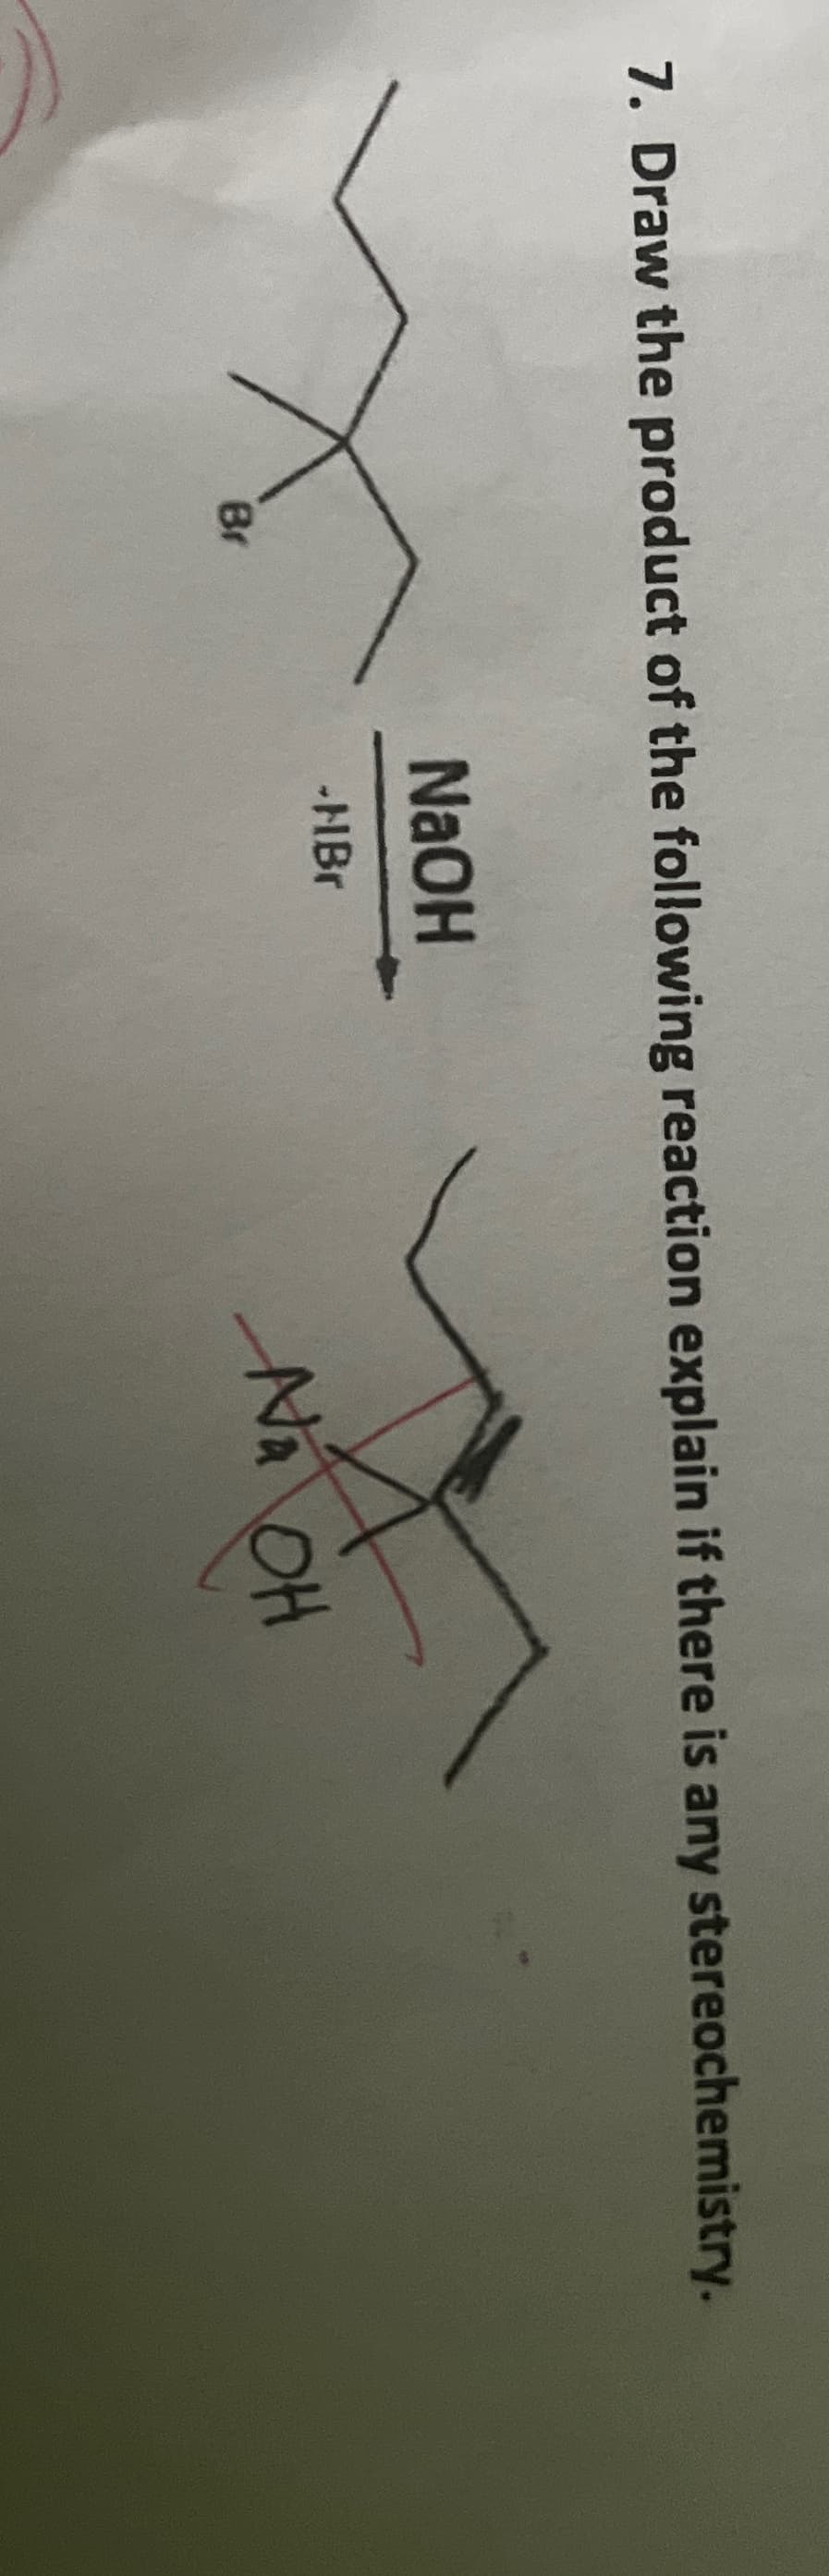 7. Draw the product of the following reaction explain if there is any stereochemistry.
Br
NaOH
-HBr
Ná
Na OH